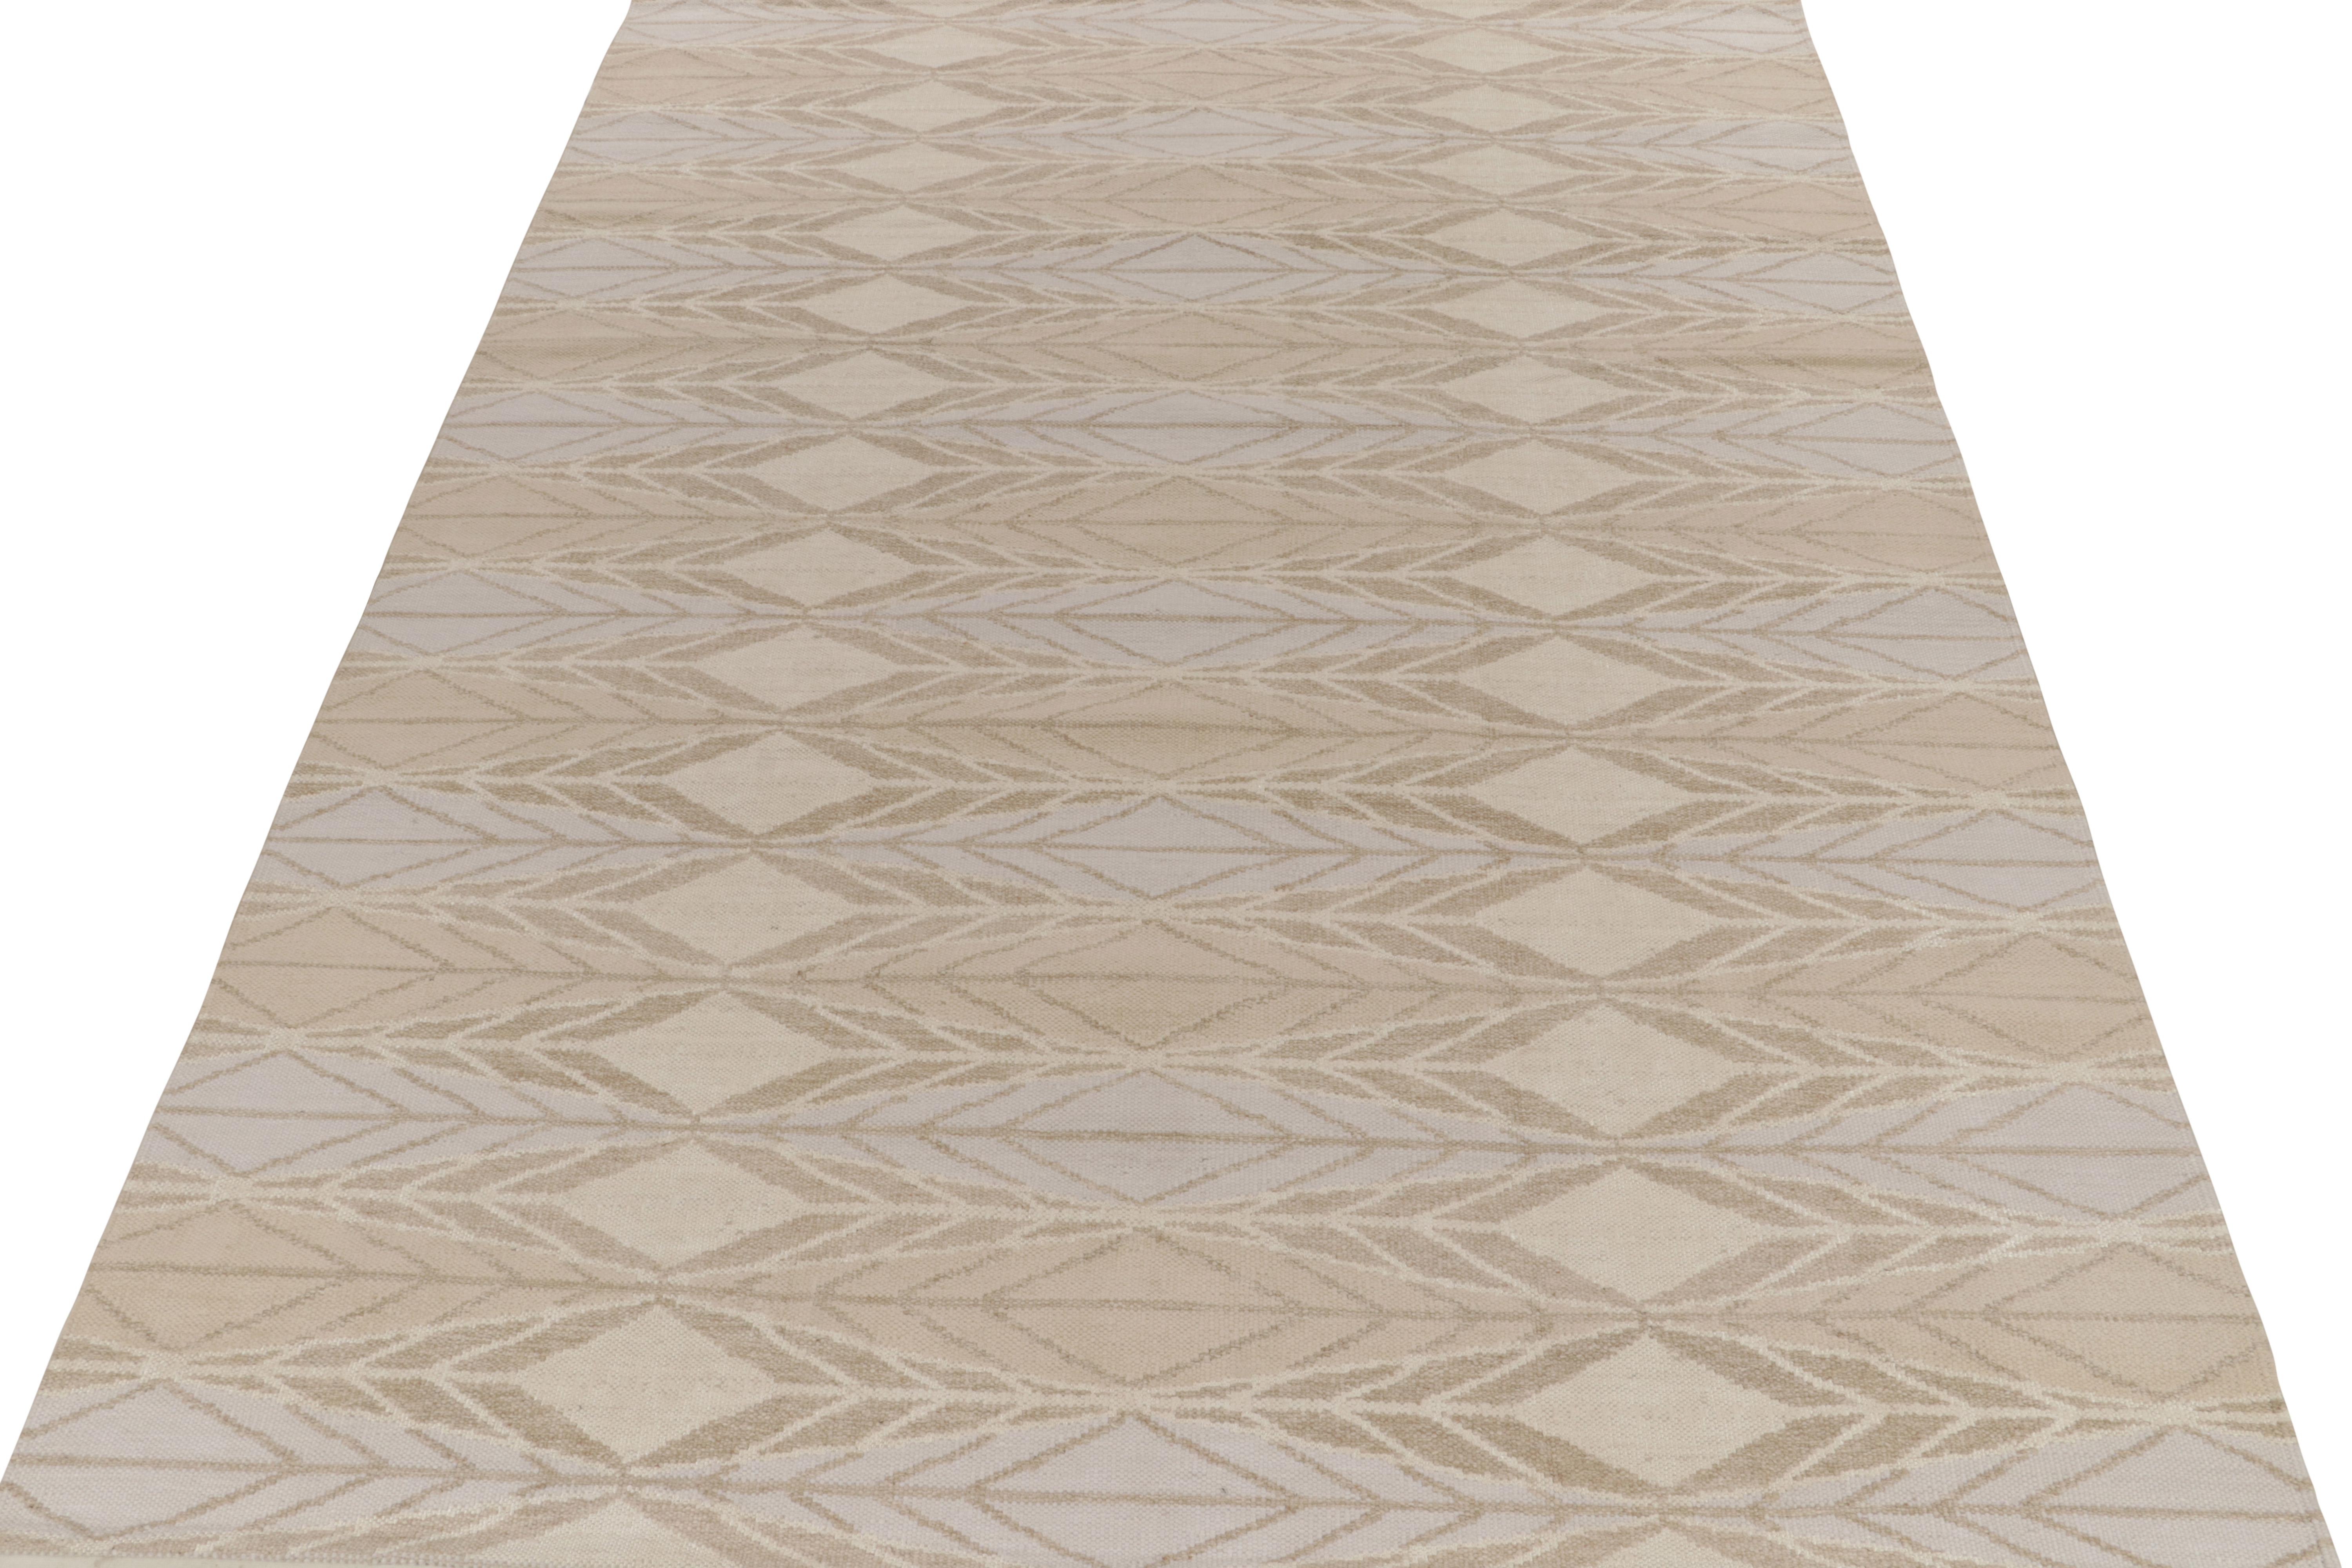 Scandinavian Modern Rug & Kilim’s Scandinavian Style Kilim in Taupe, Blue and Off-White Patterns For Sale